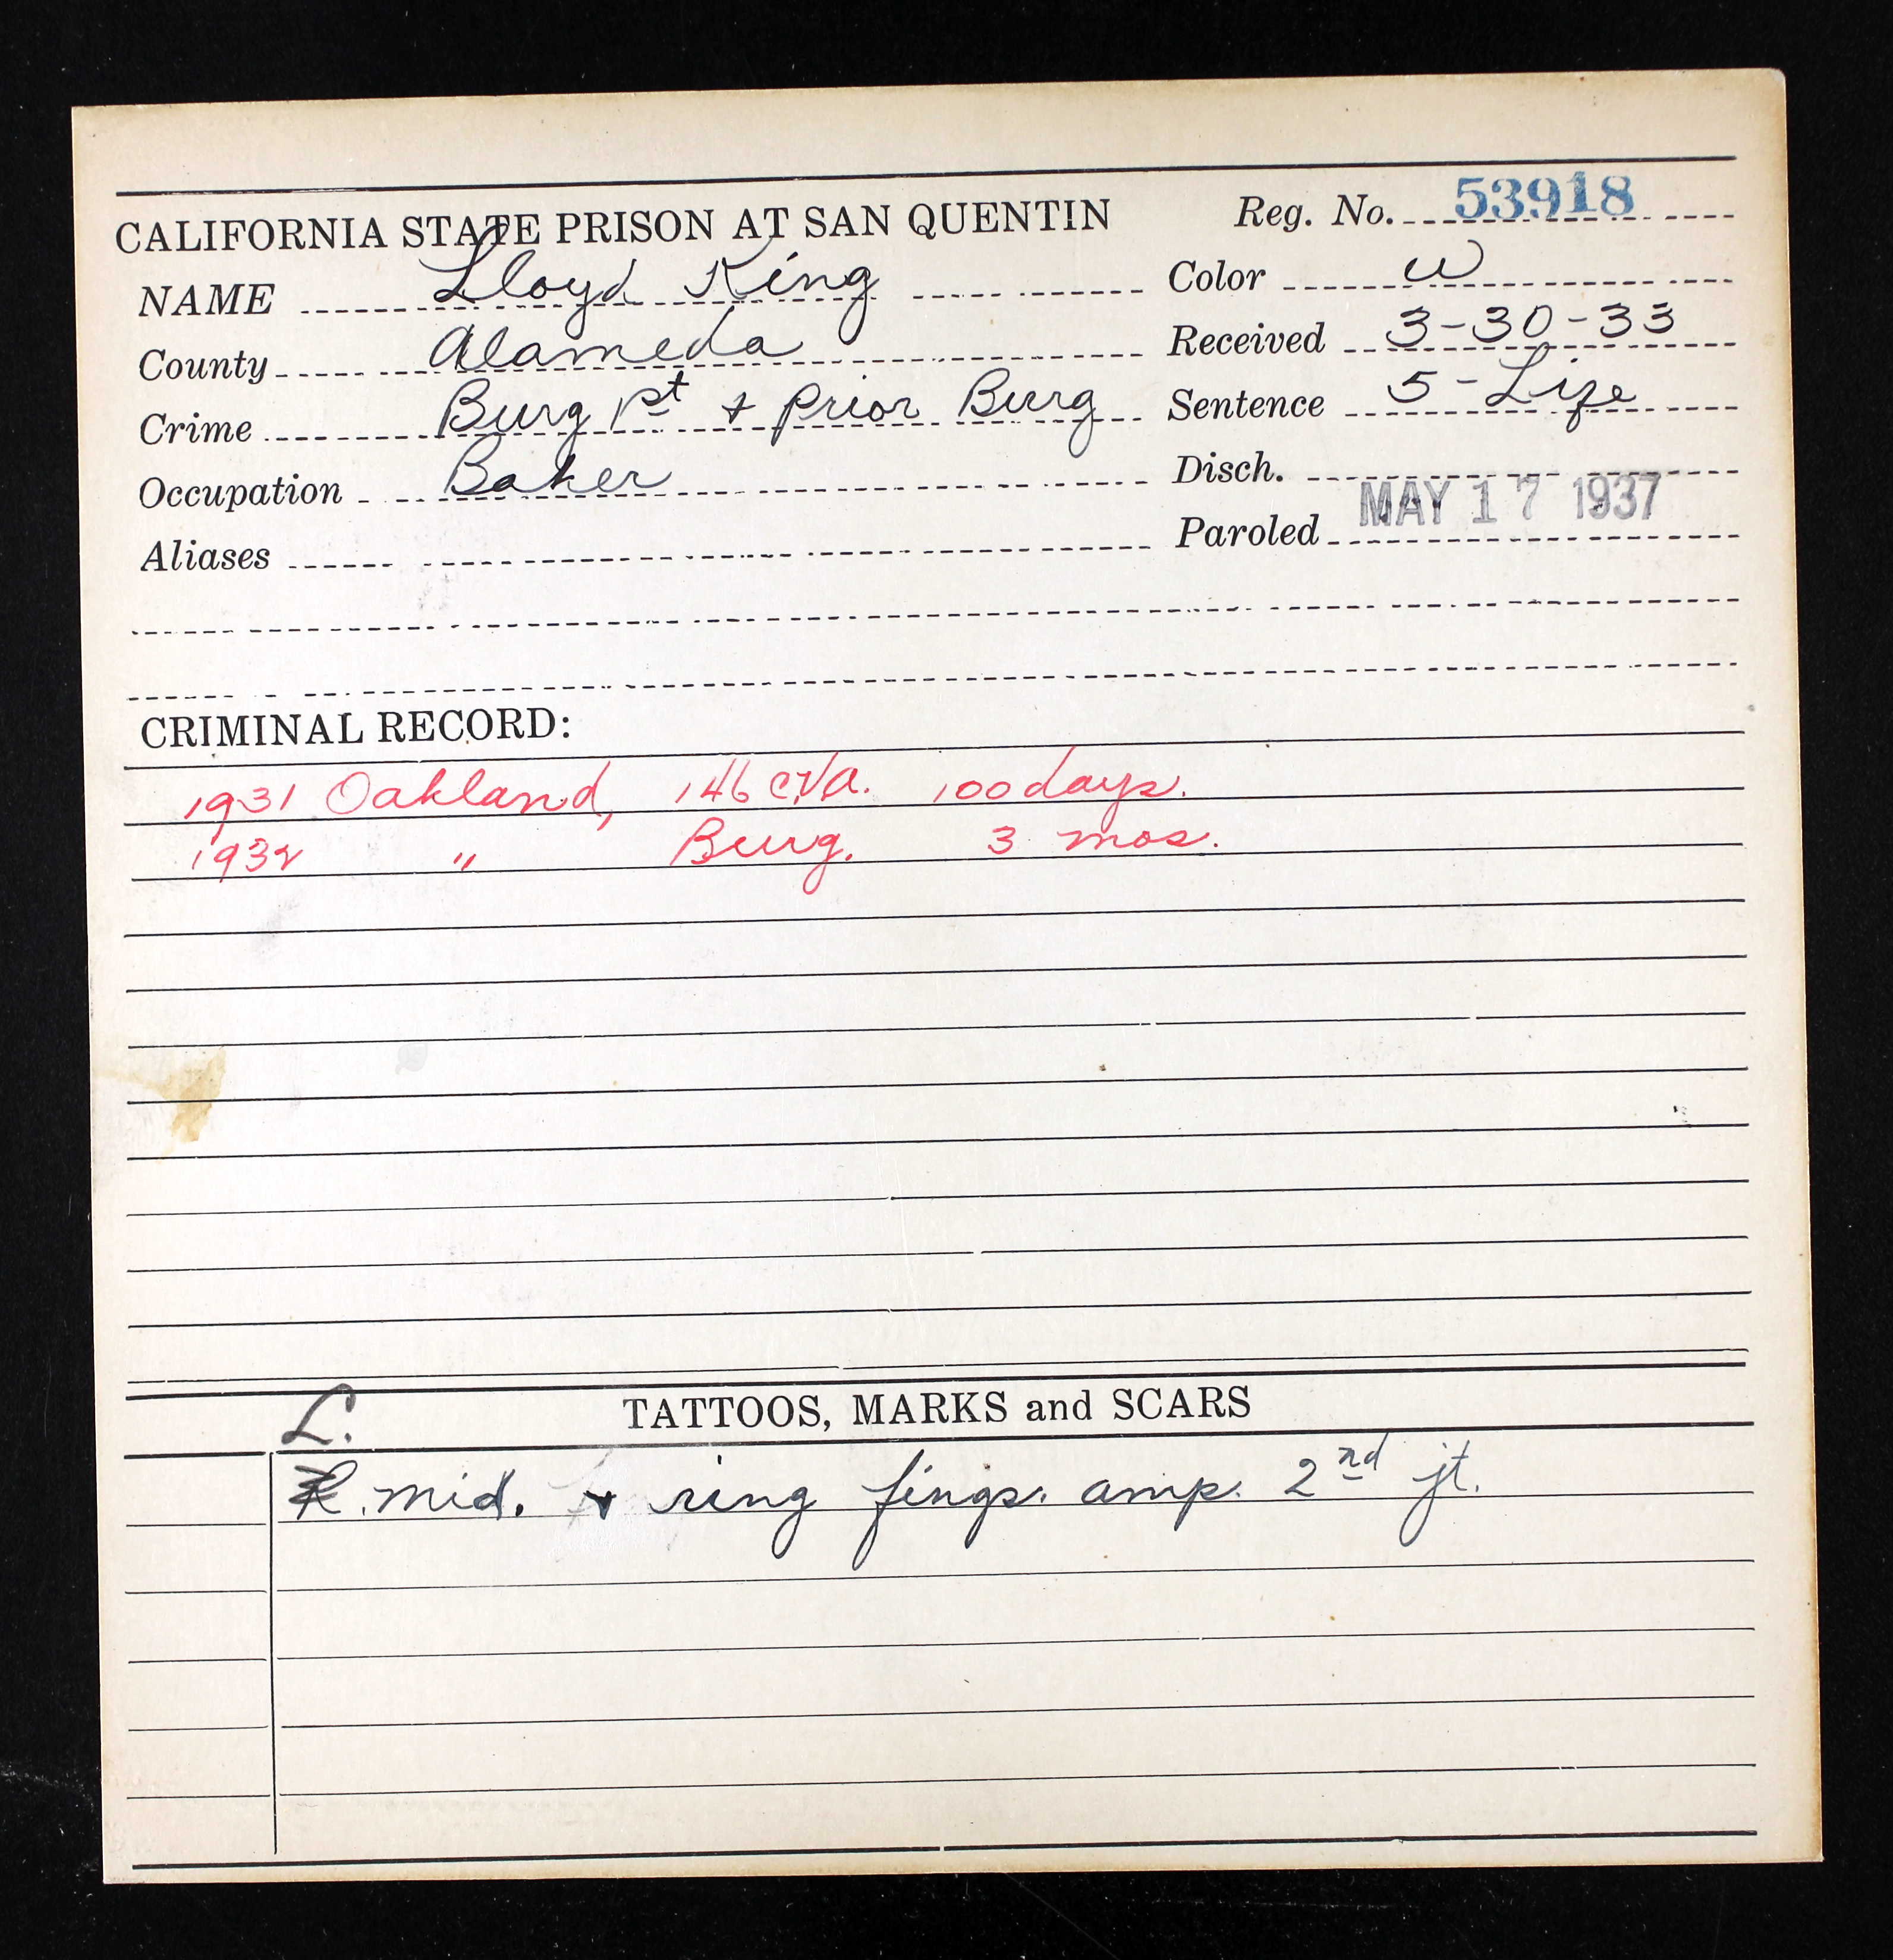 Inmate identification card for Lloyd King